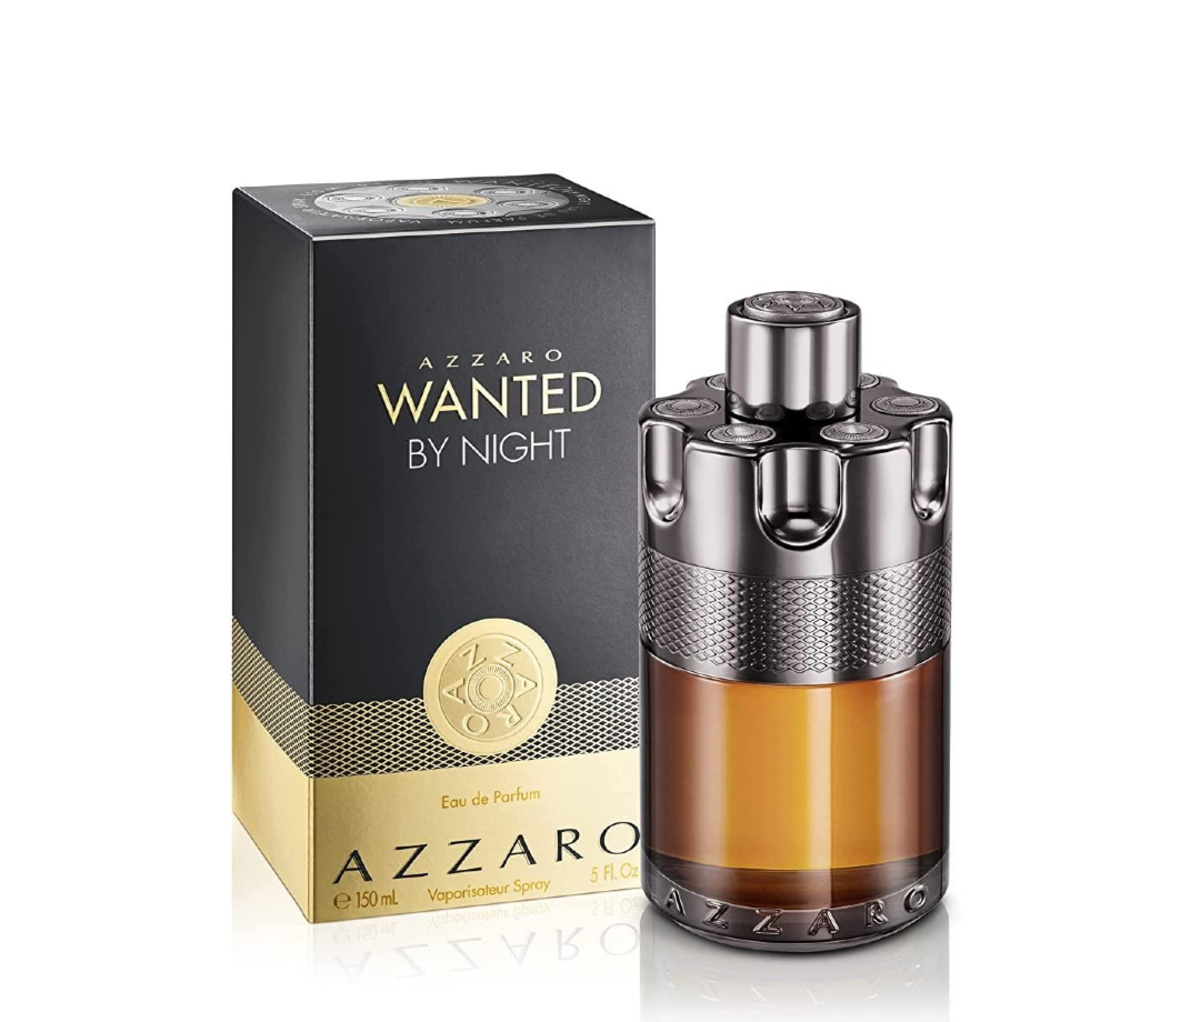 Wanted by Night by Azzaro